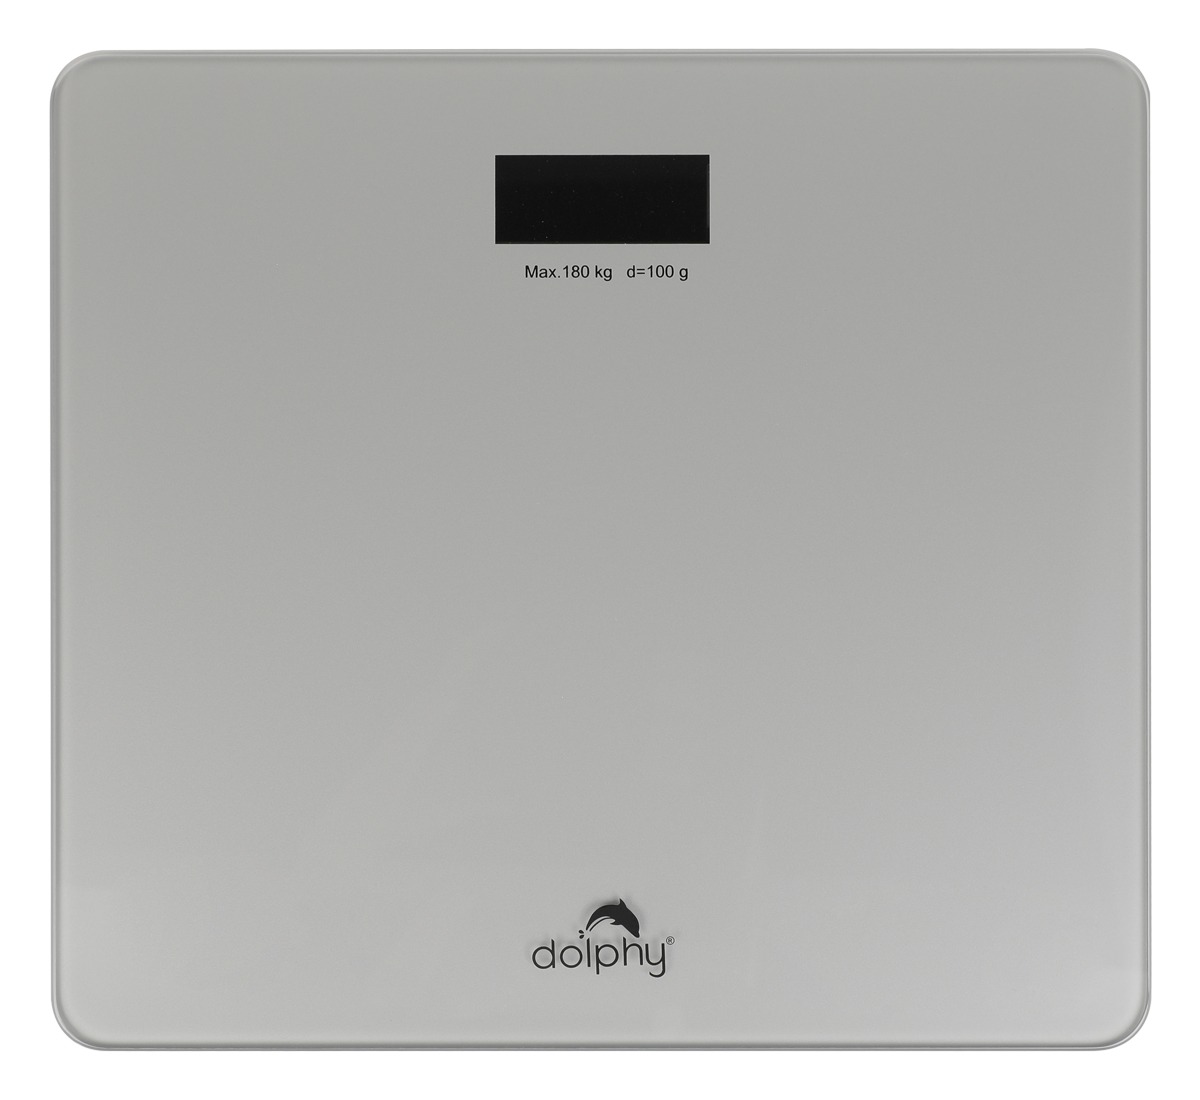 Body Weight Scale with Lighted LCD Display
